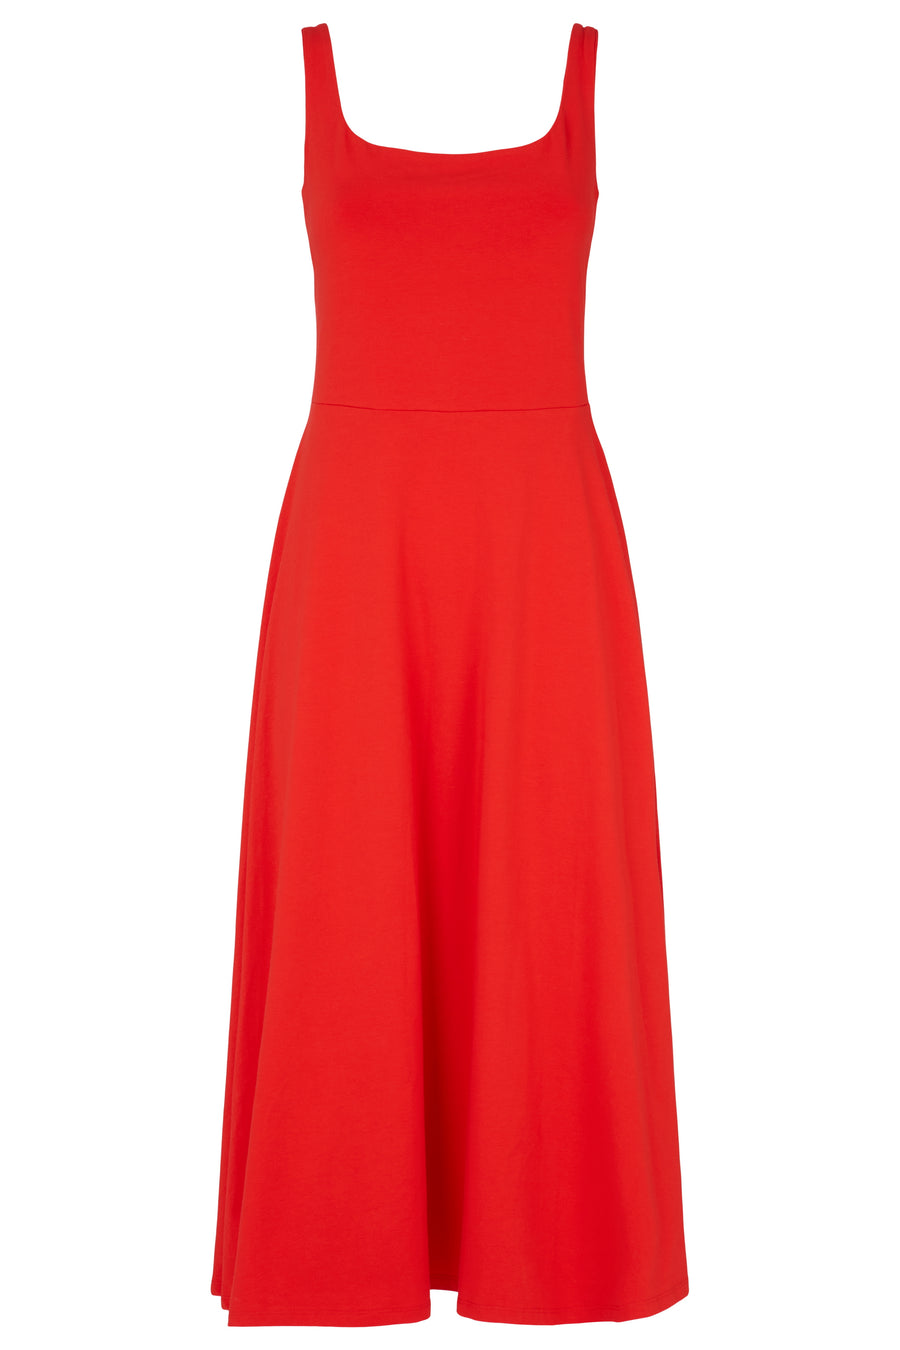 People Tree Fair Trade, Ethical & Sustainable Tyra Dress in Red 95% organic certified cotton, 5% elastane